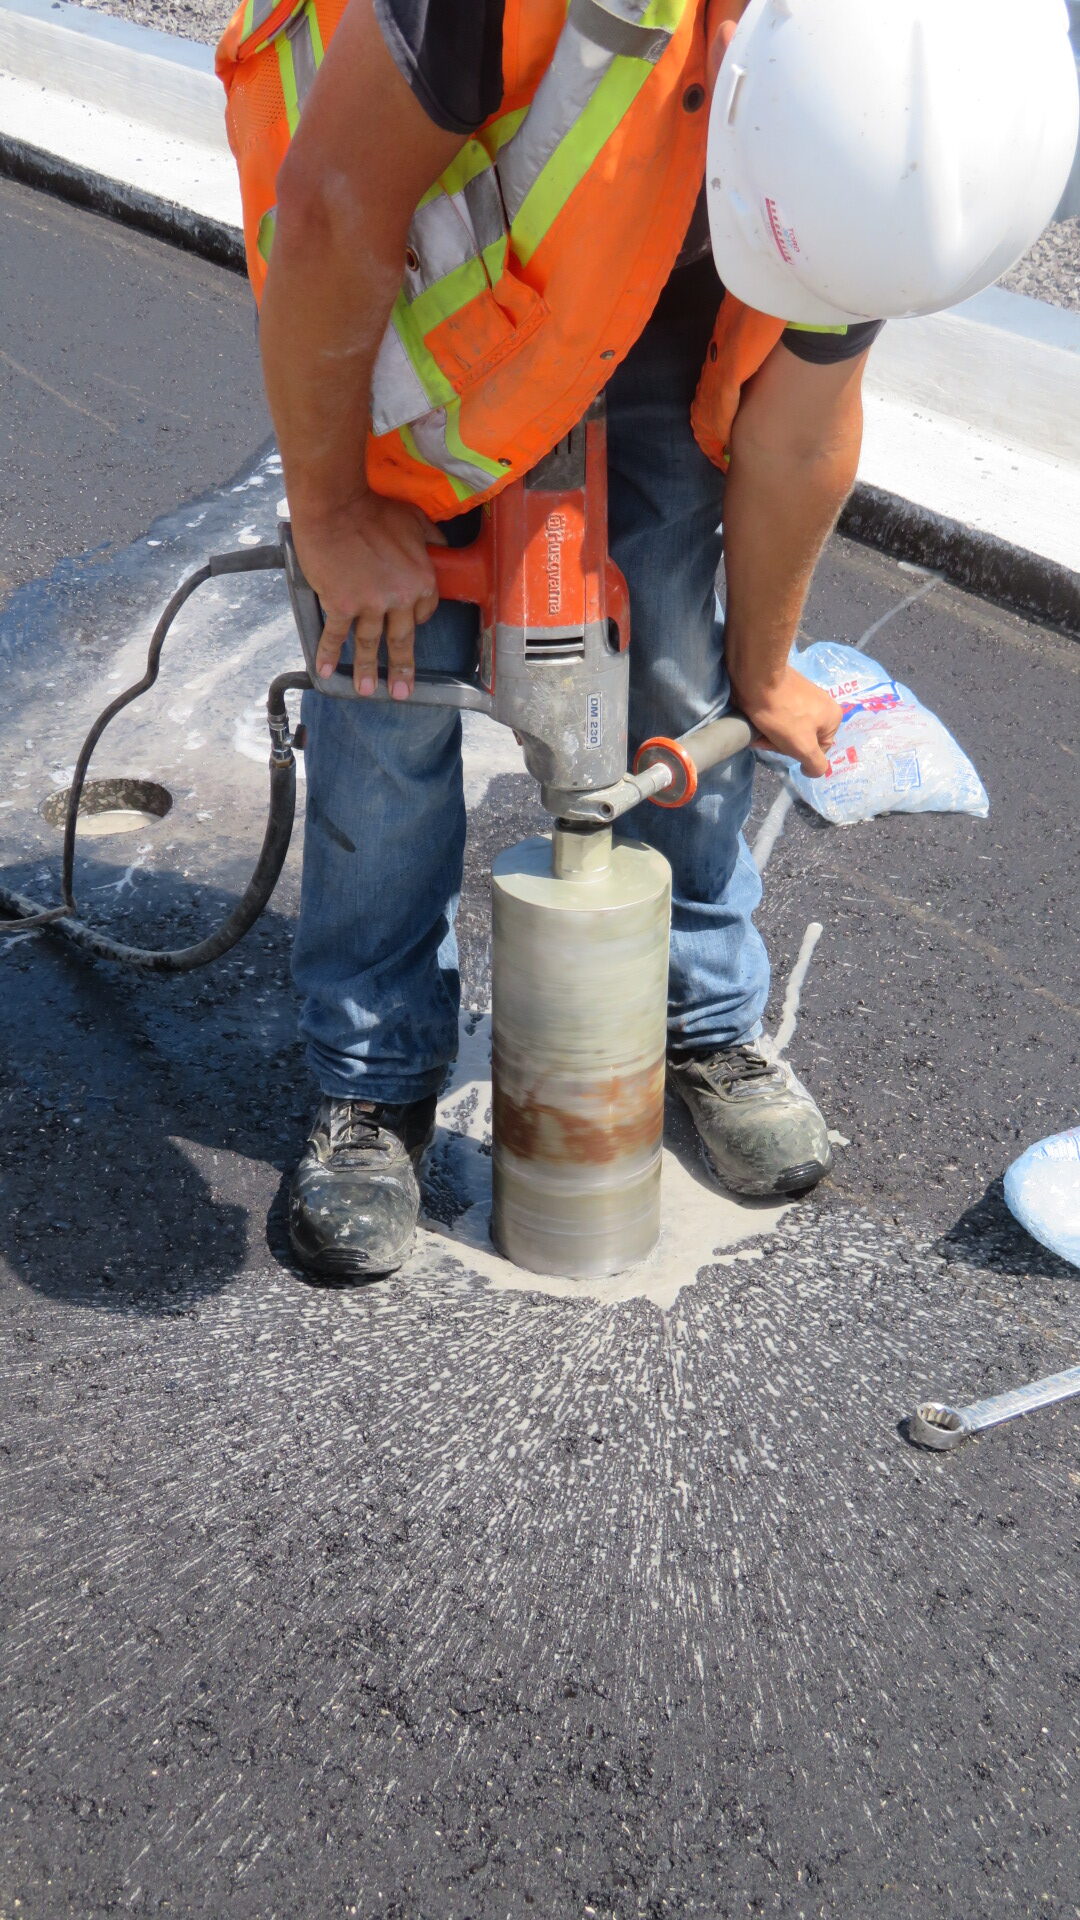 Taking a core sample of the new asphalt